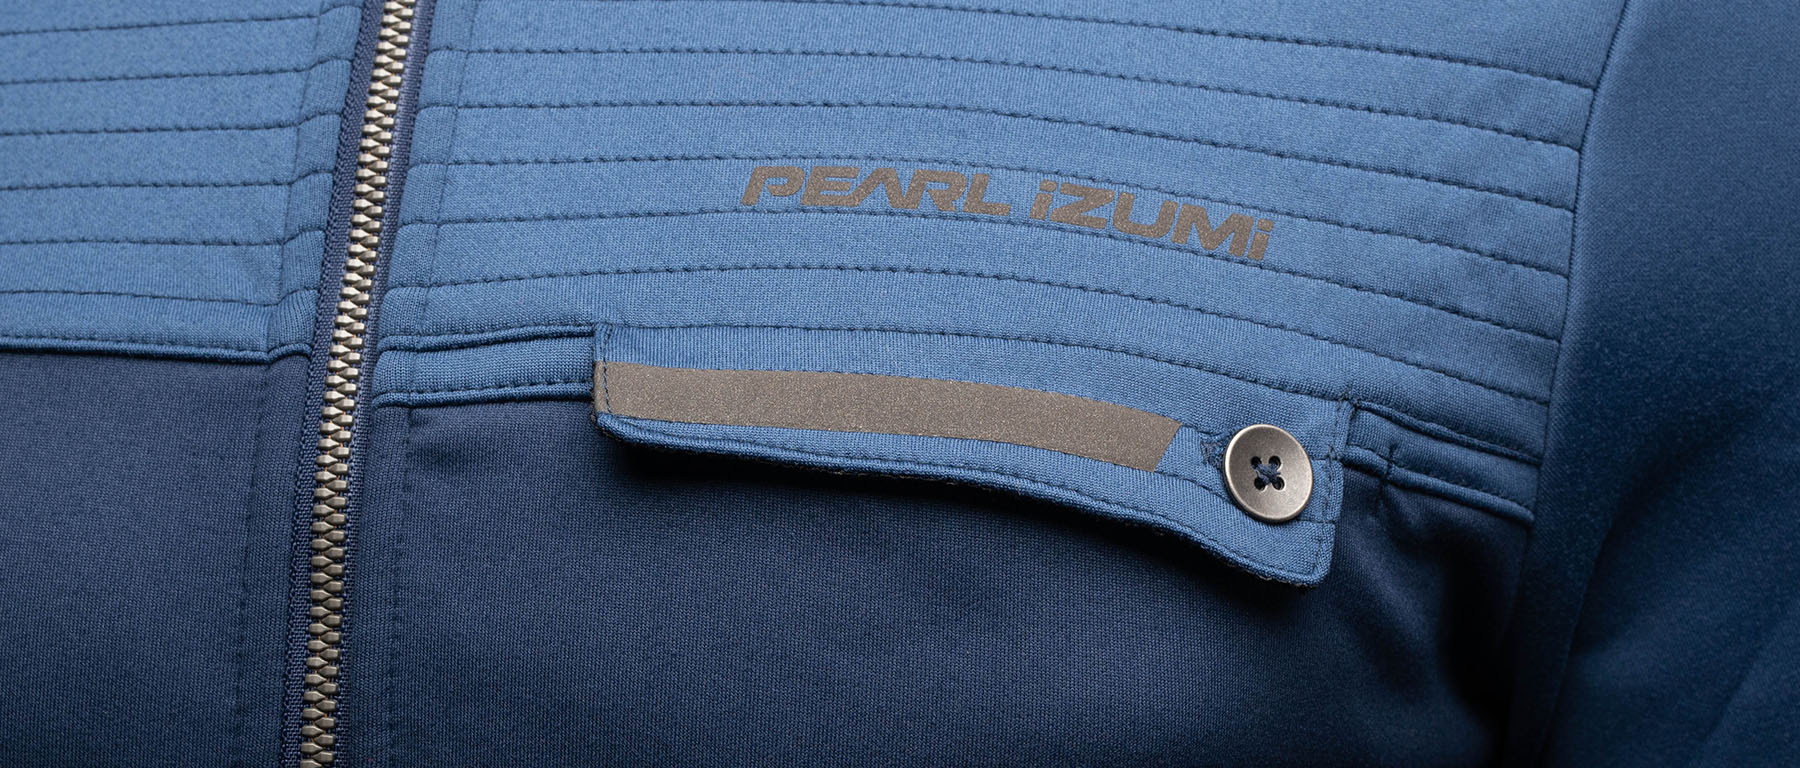 Pearl Izumi Interval Thermal Jersey